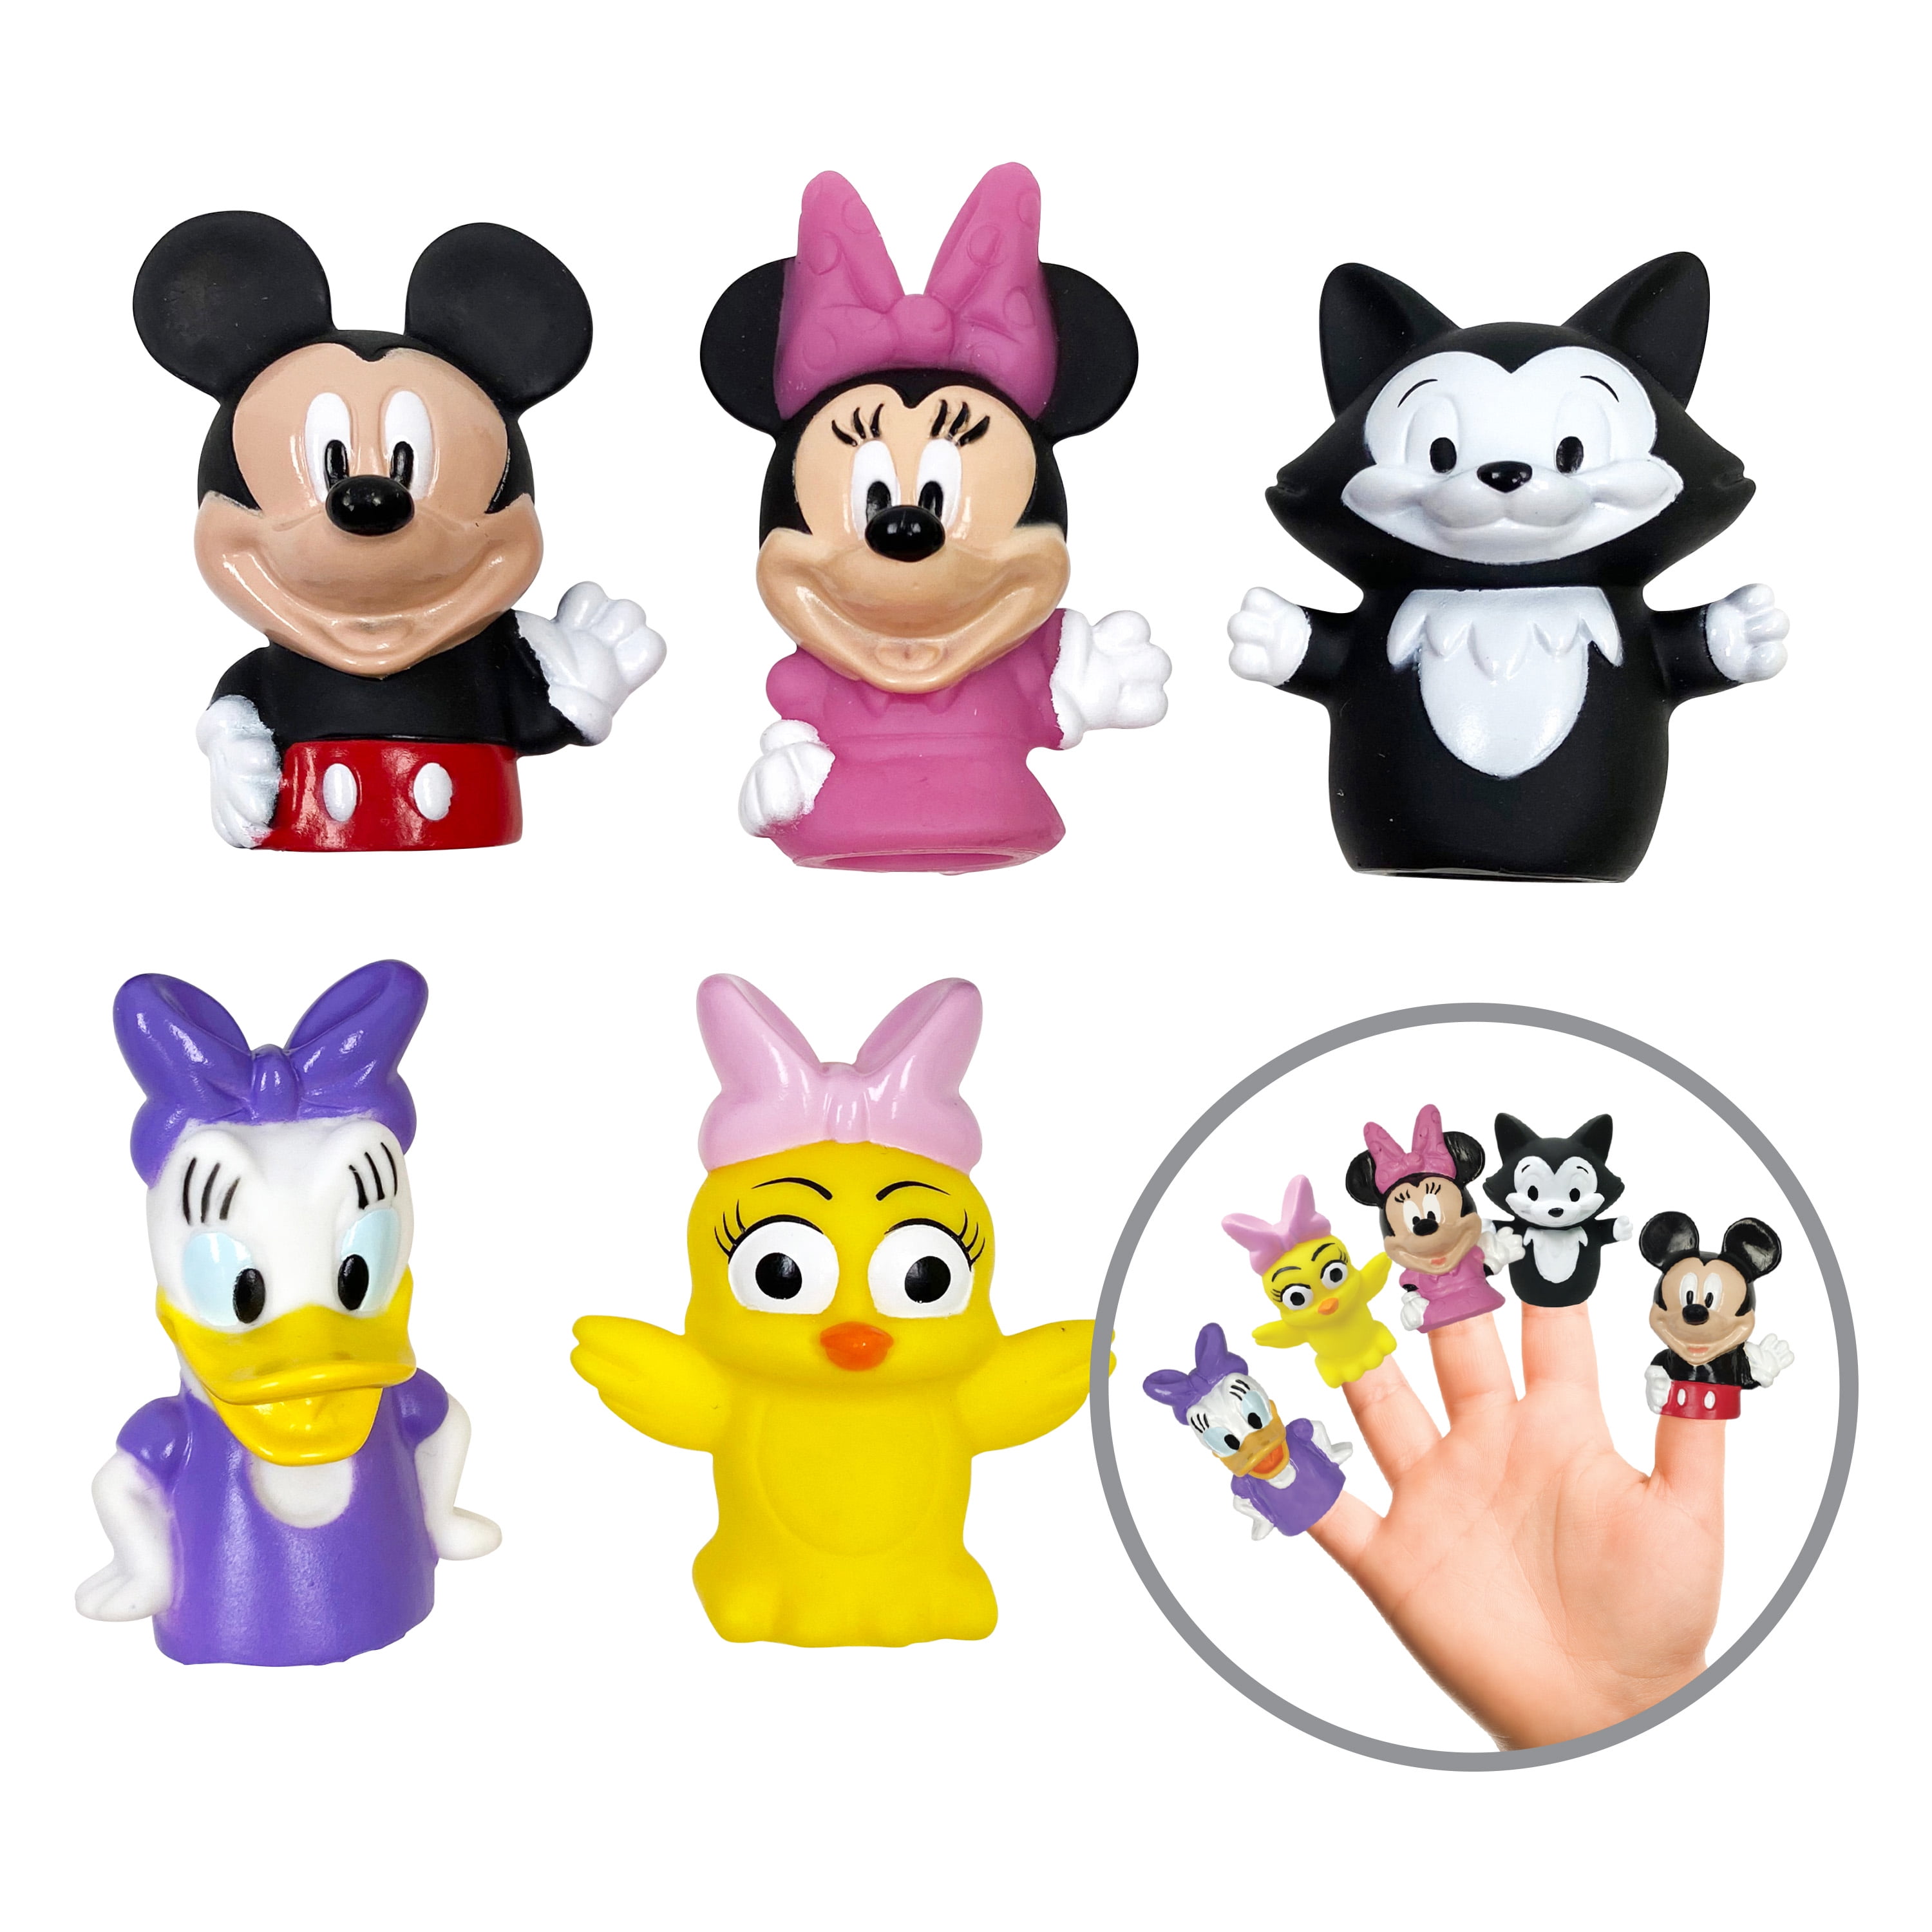 Disney Junior Minnie Mouse 3-Pack Bath Toys, Figures Include Minnie Mouse, Daisy Duck, and Figaro